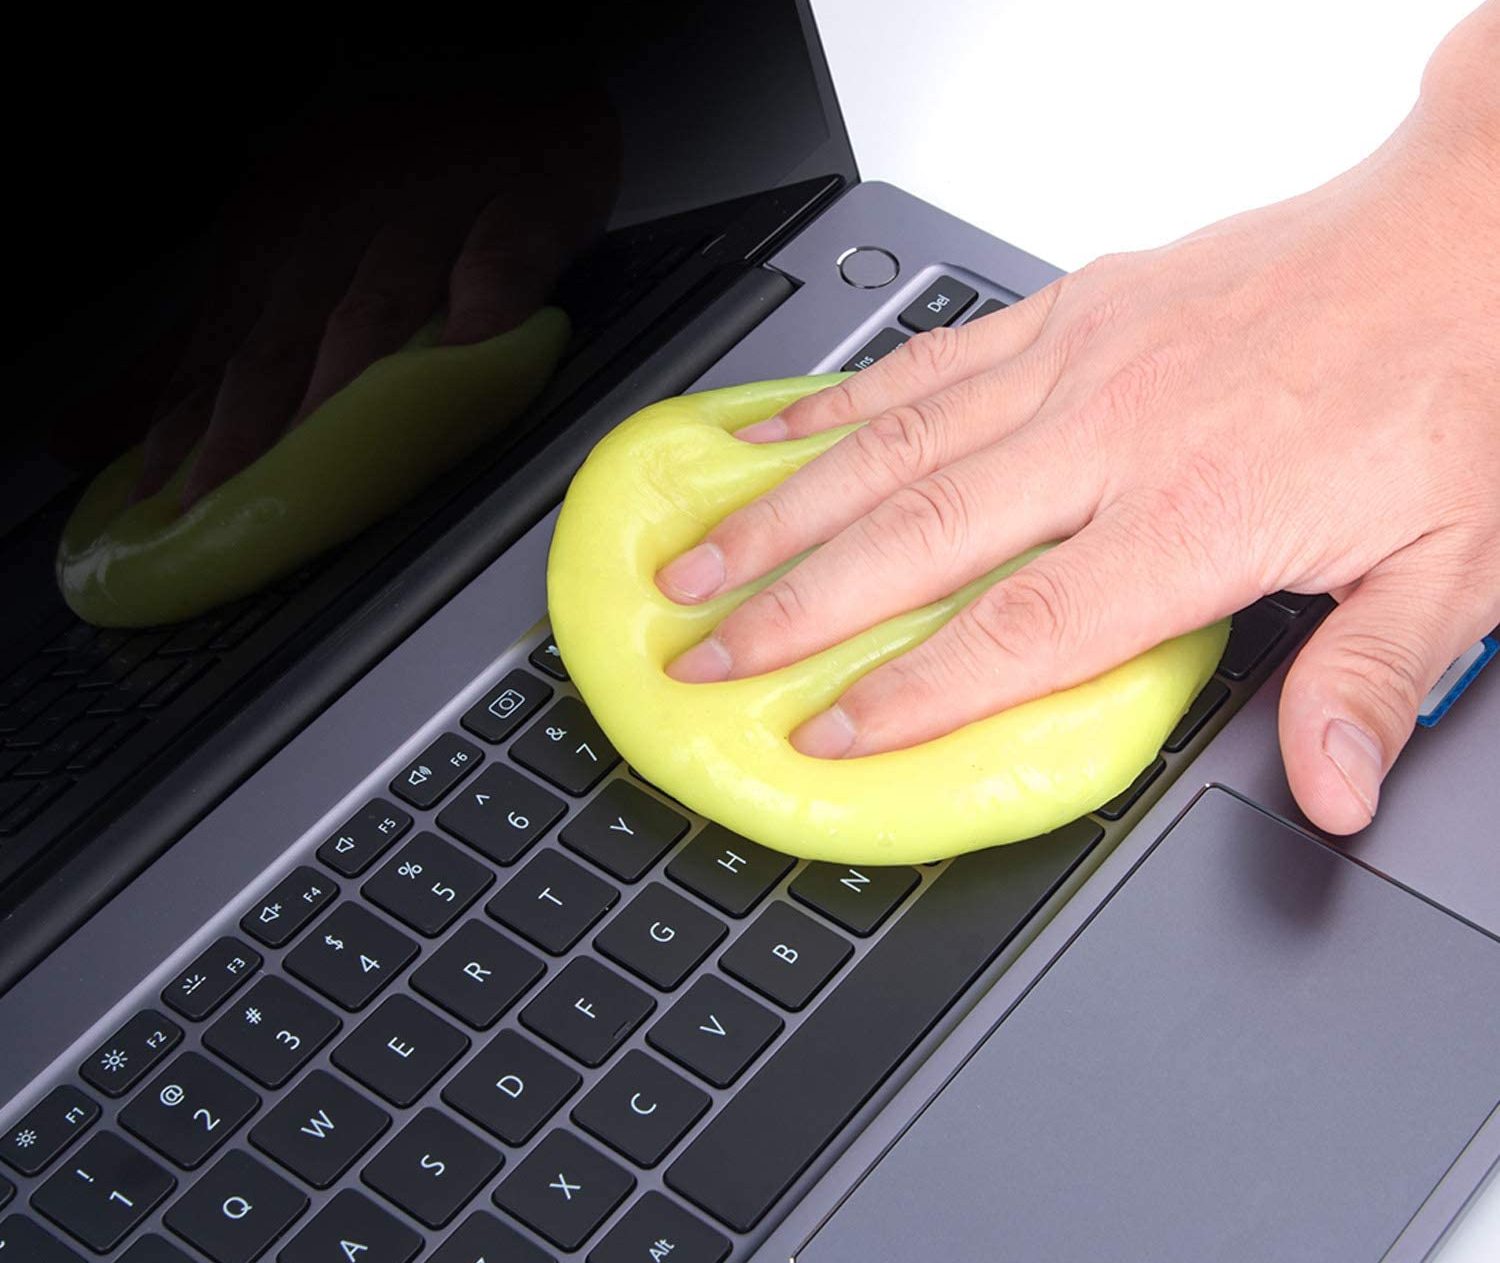 Turn off your computer and unplug the mouse.
Use a soft cloth or cotton swab dampened with a small amount of rubbing alcohol to clean the mouse surface and buttons.